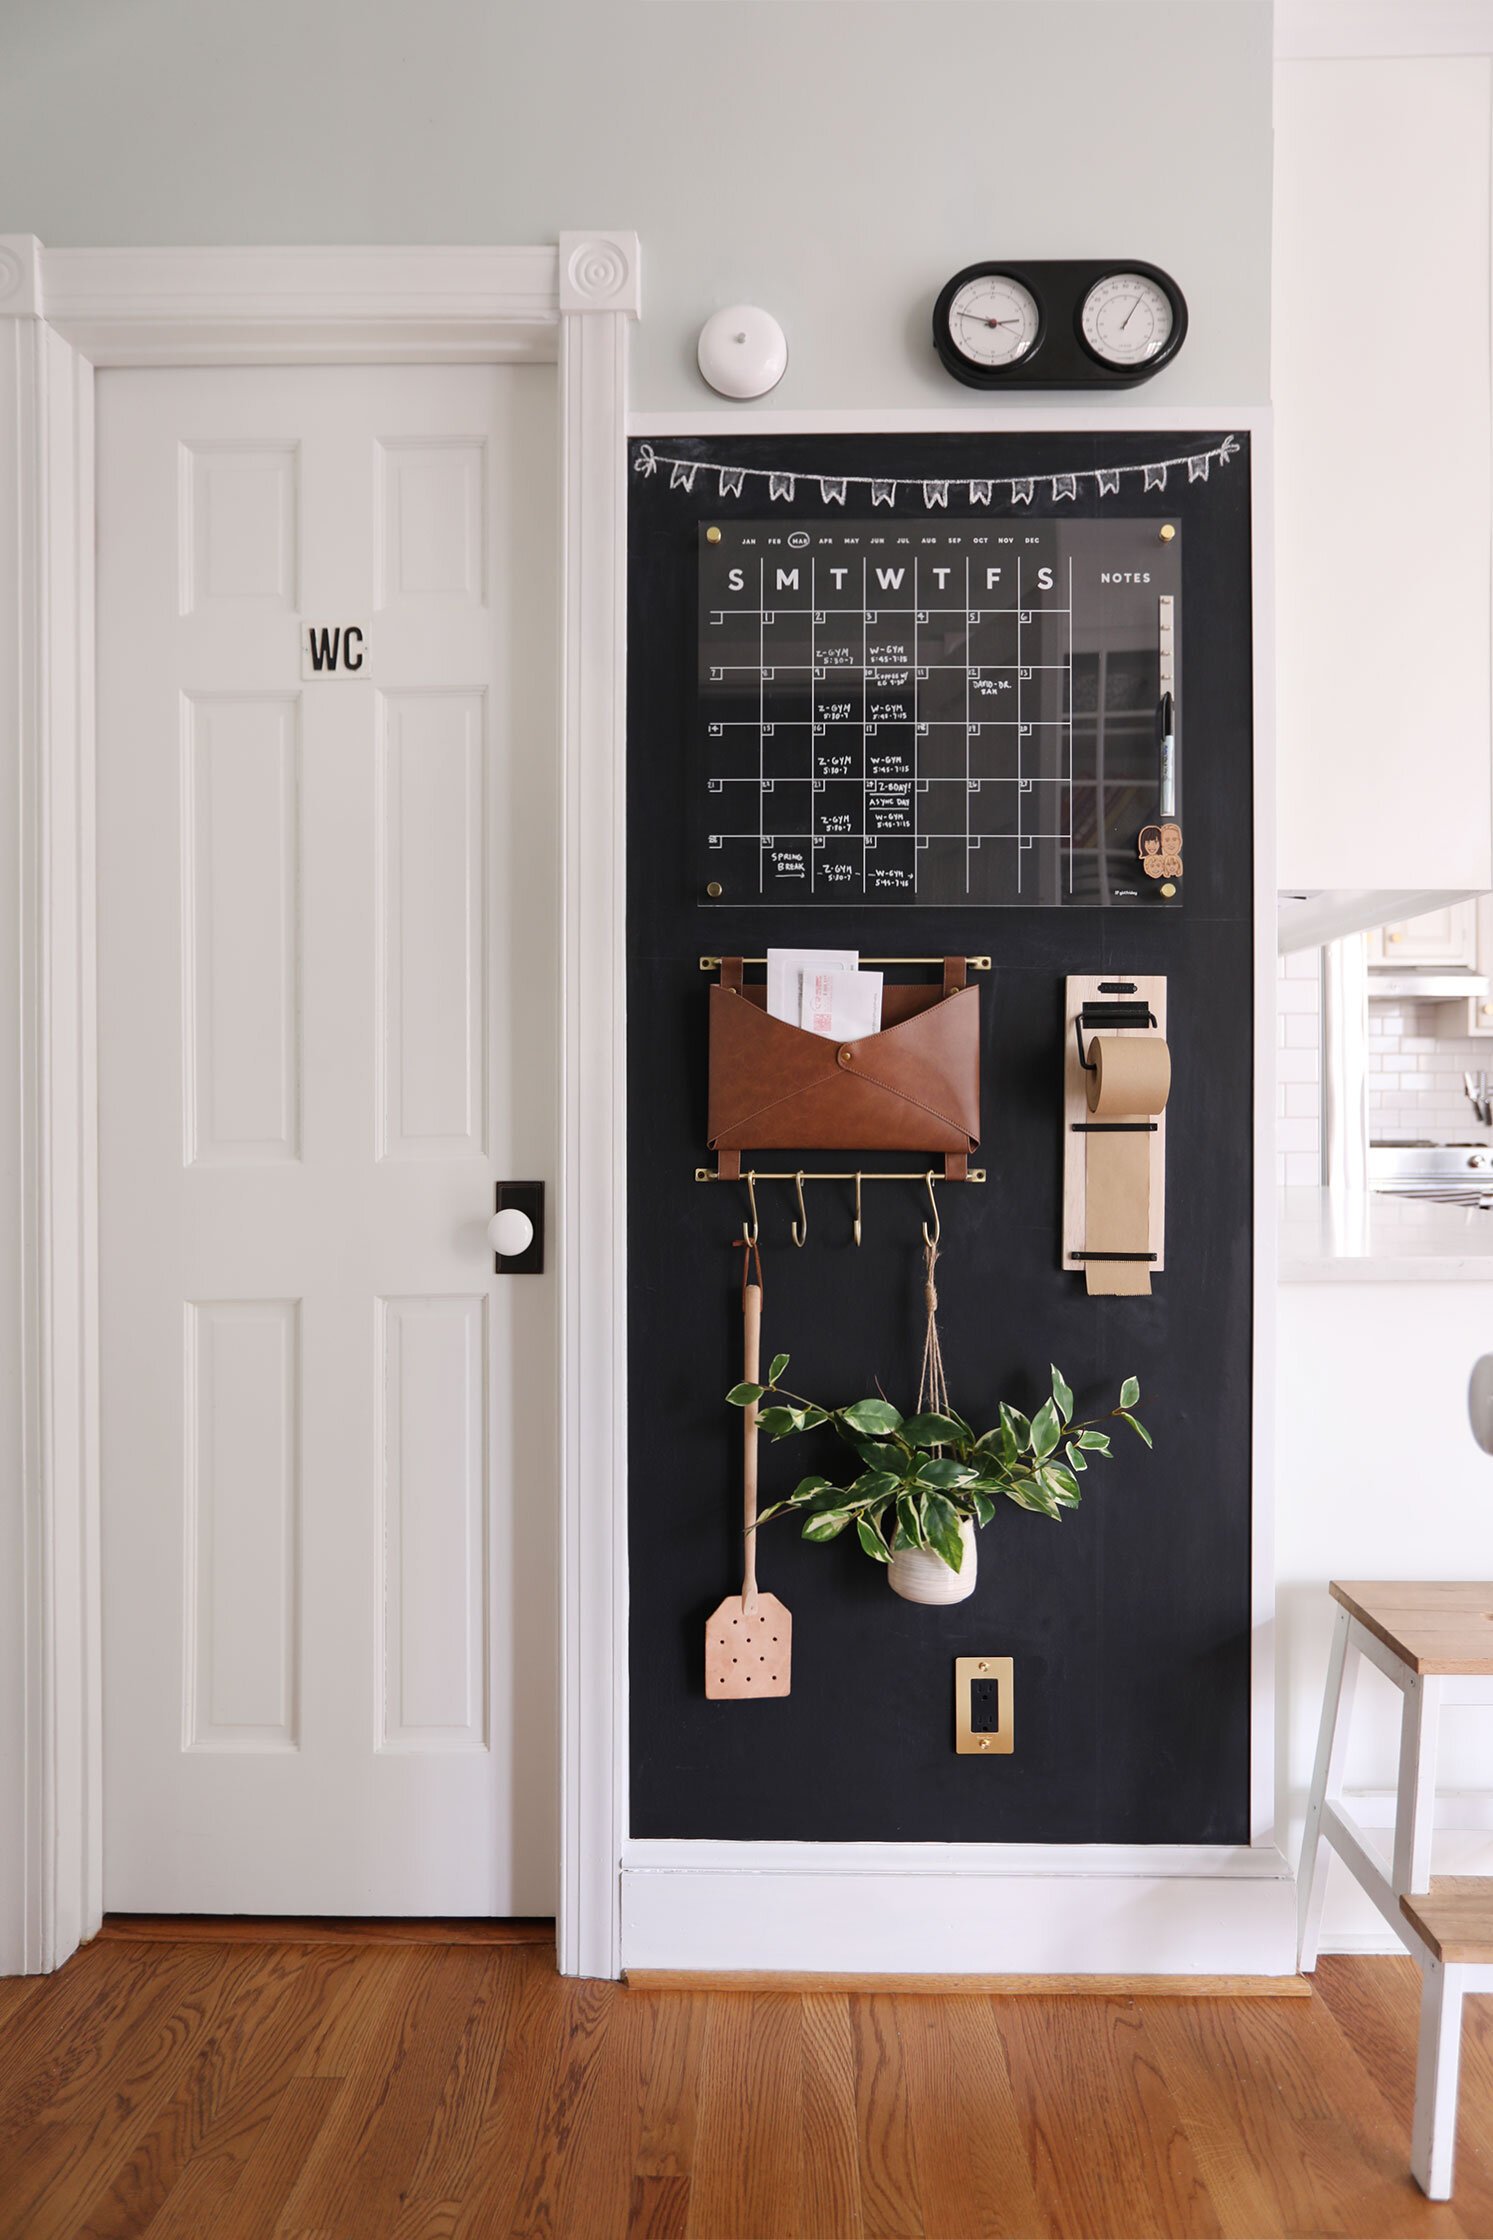 Need a Stylish Solution for Home Organization? Use Cork Boards! - homeyou